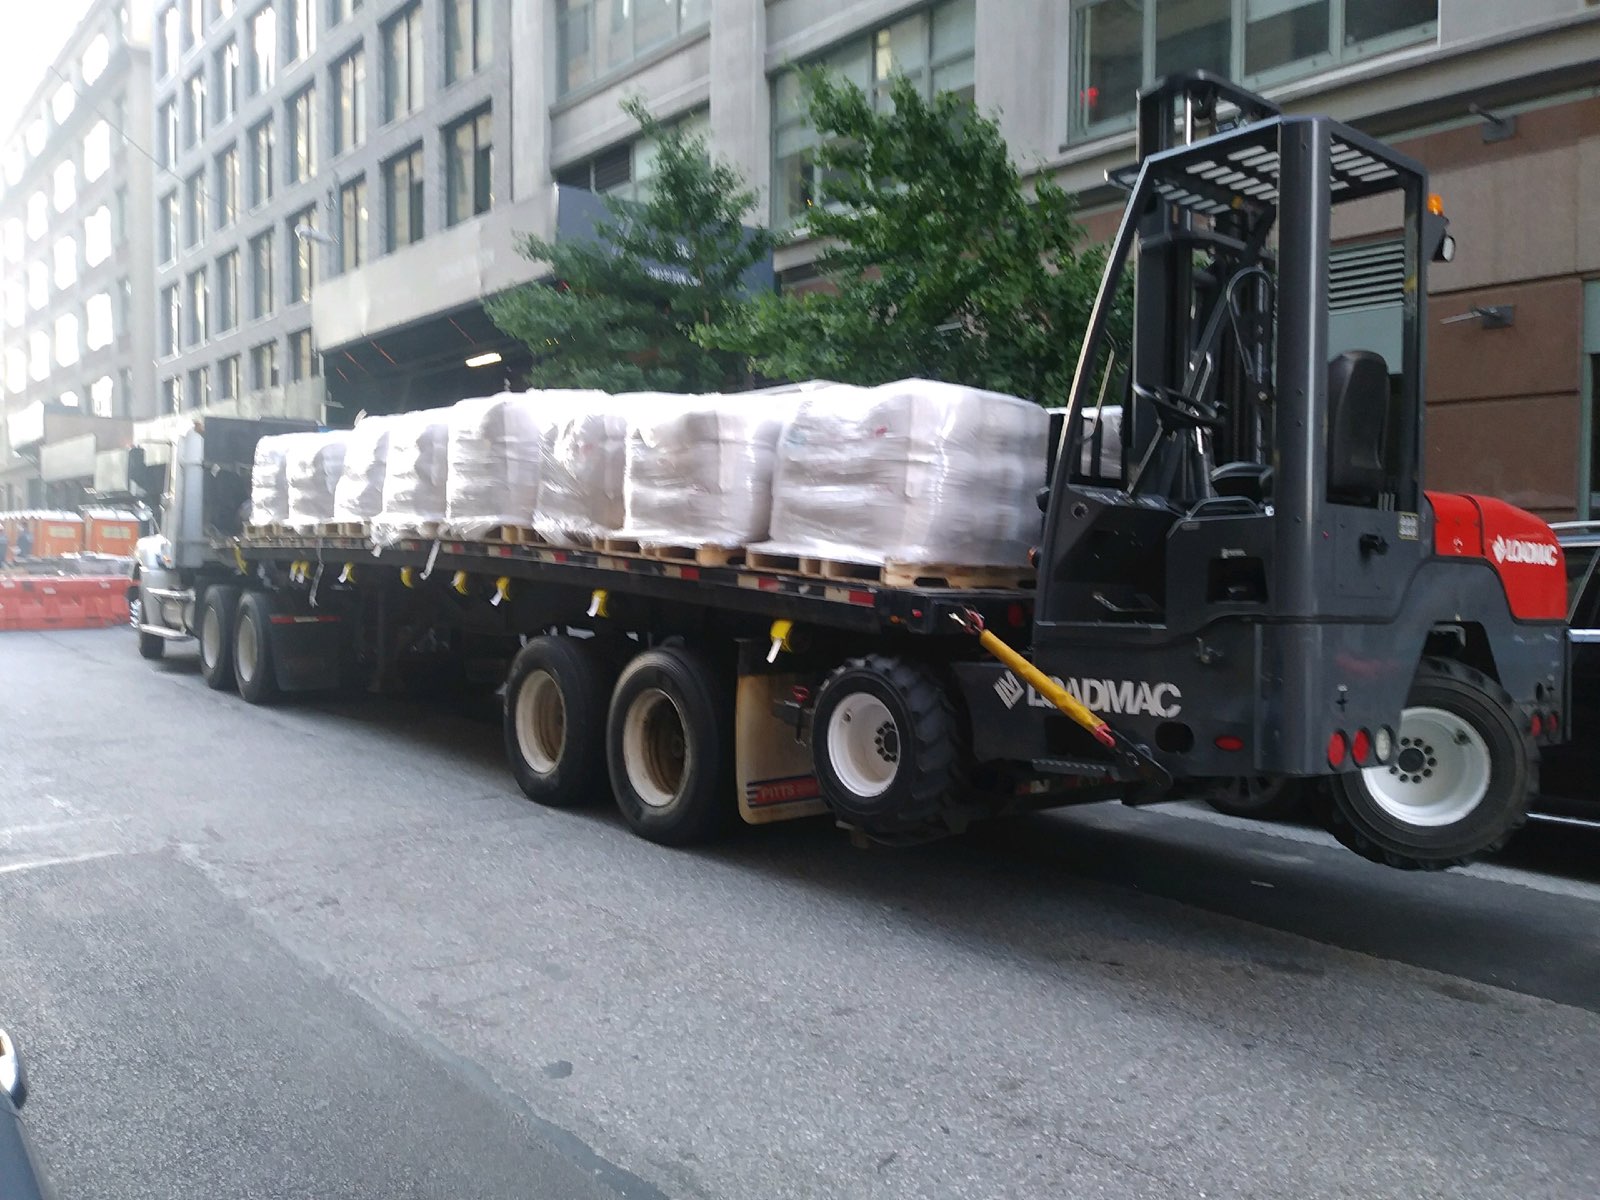 Flatbed truck hauling materials with a forklift on the back